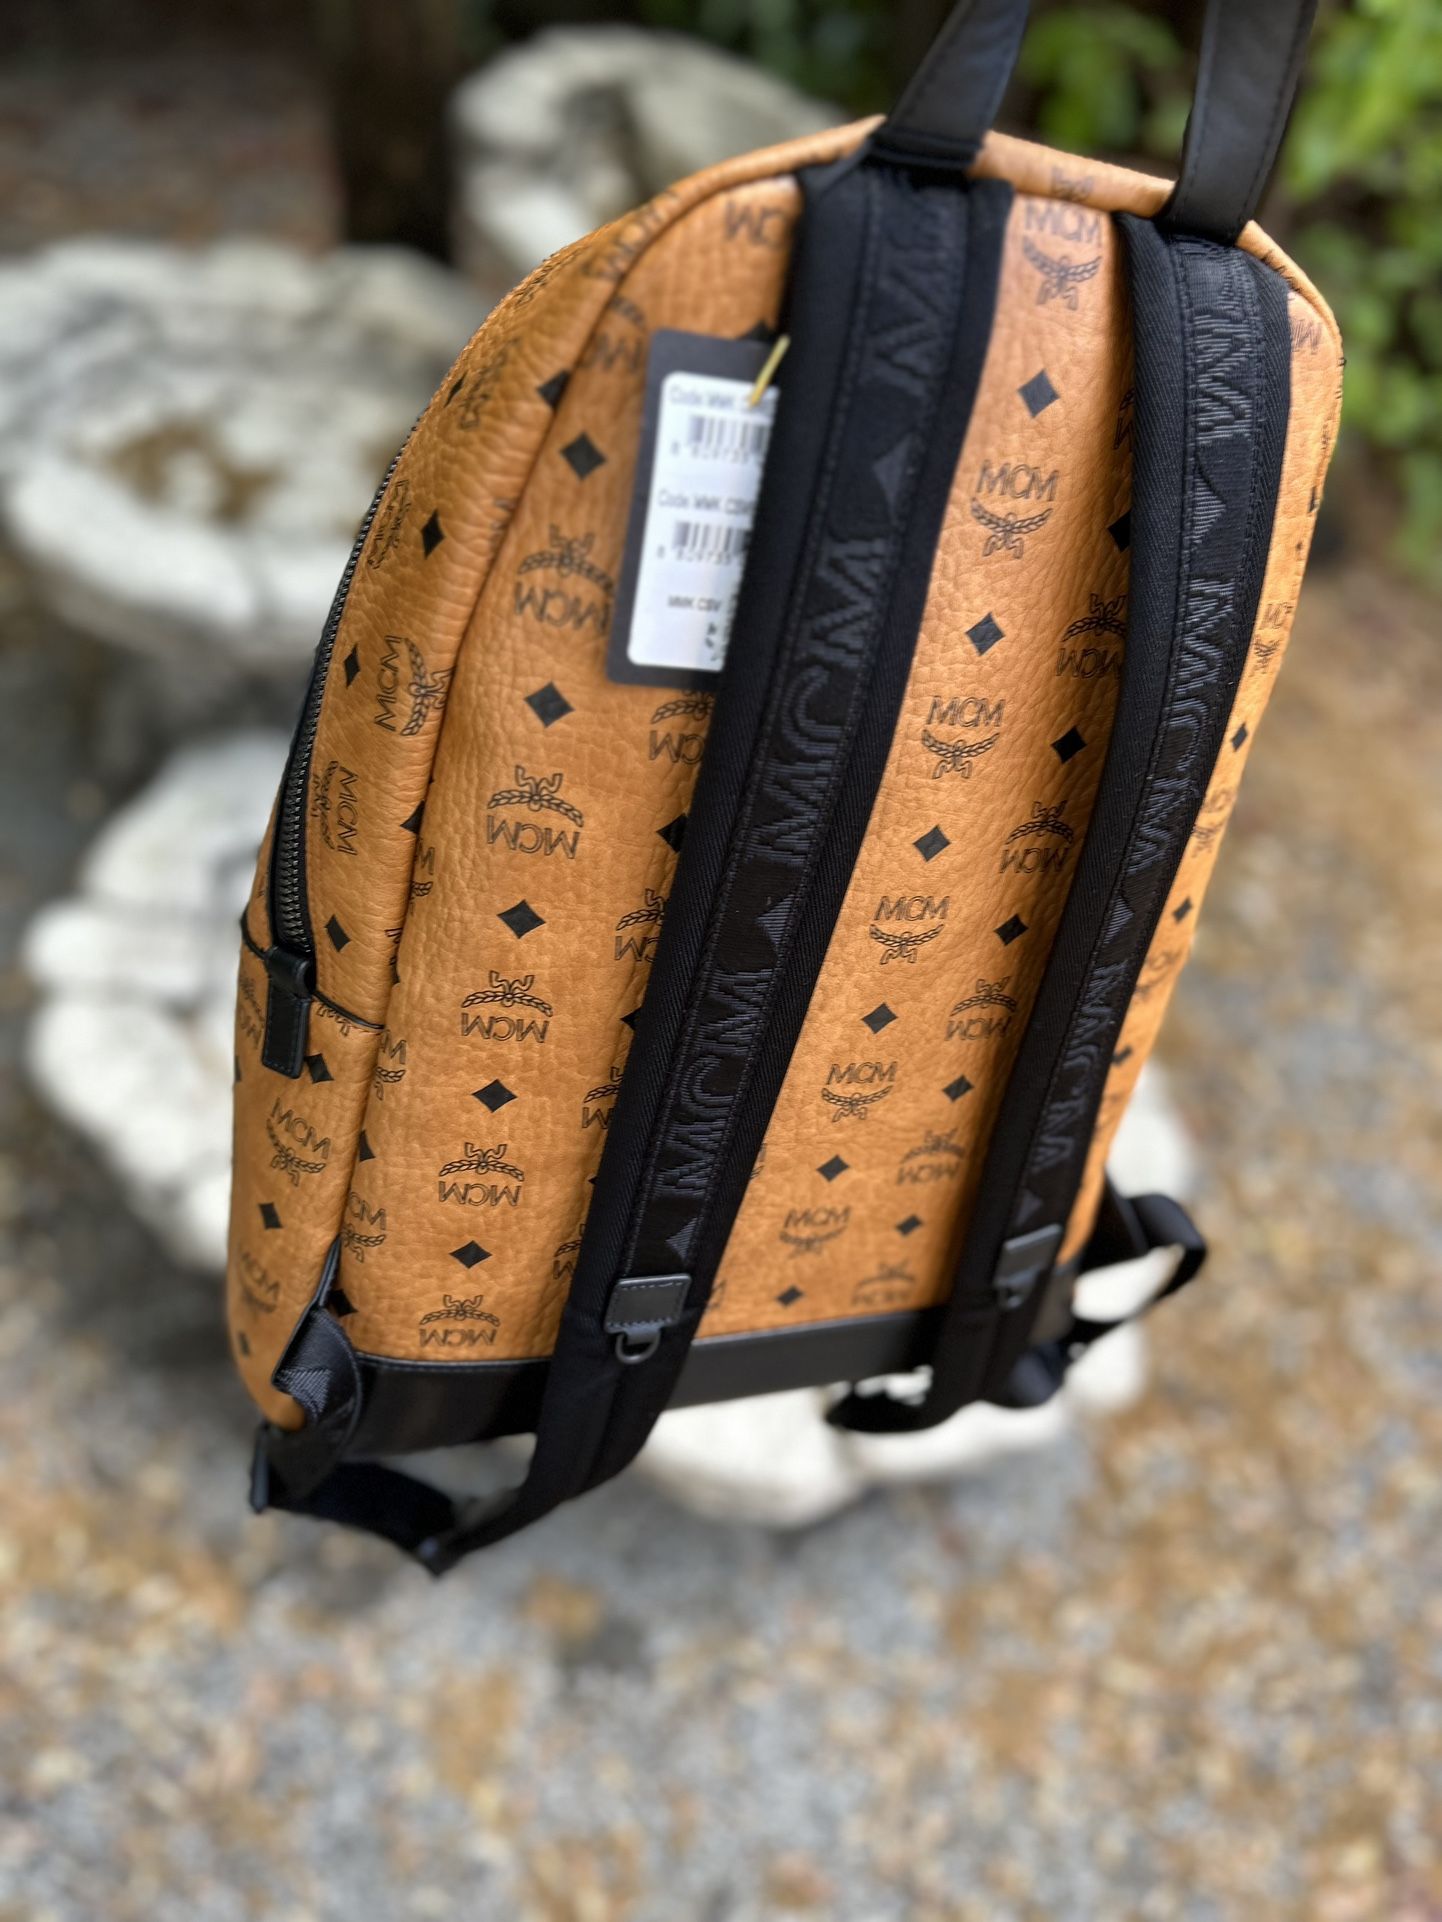 Brand New MCM X Bape Backpack for Sale in Fairfield, CA - OfferUp